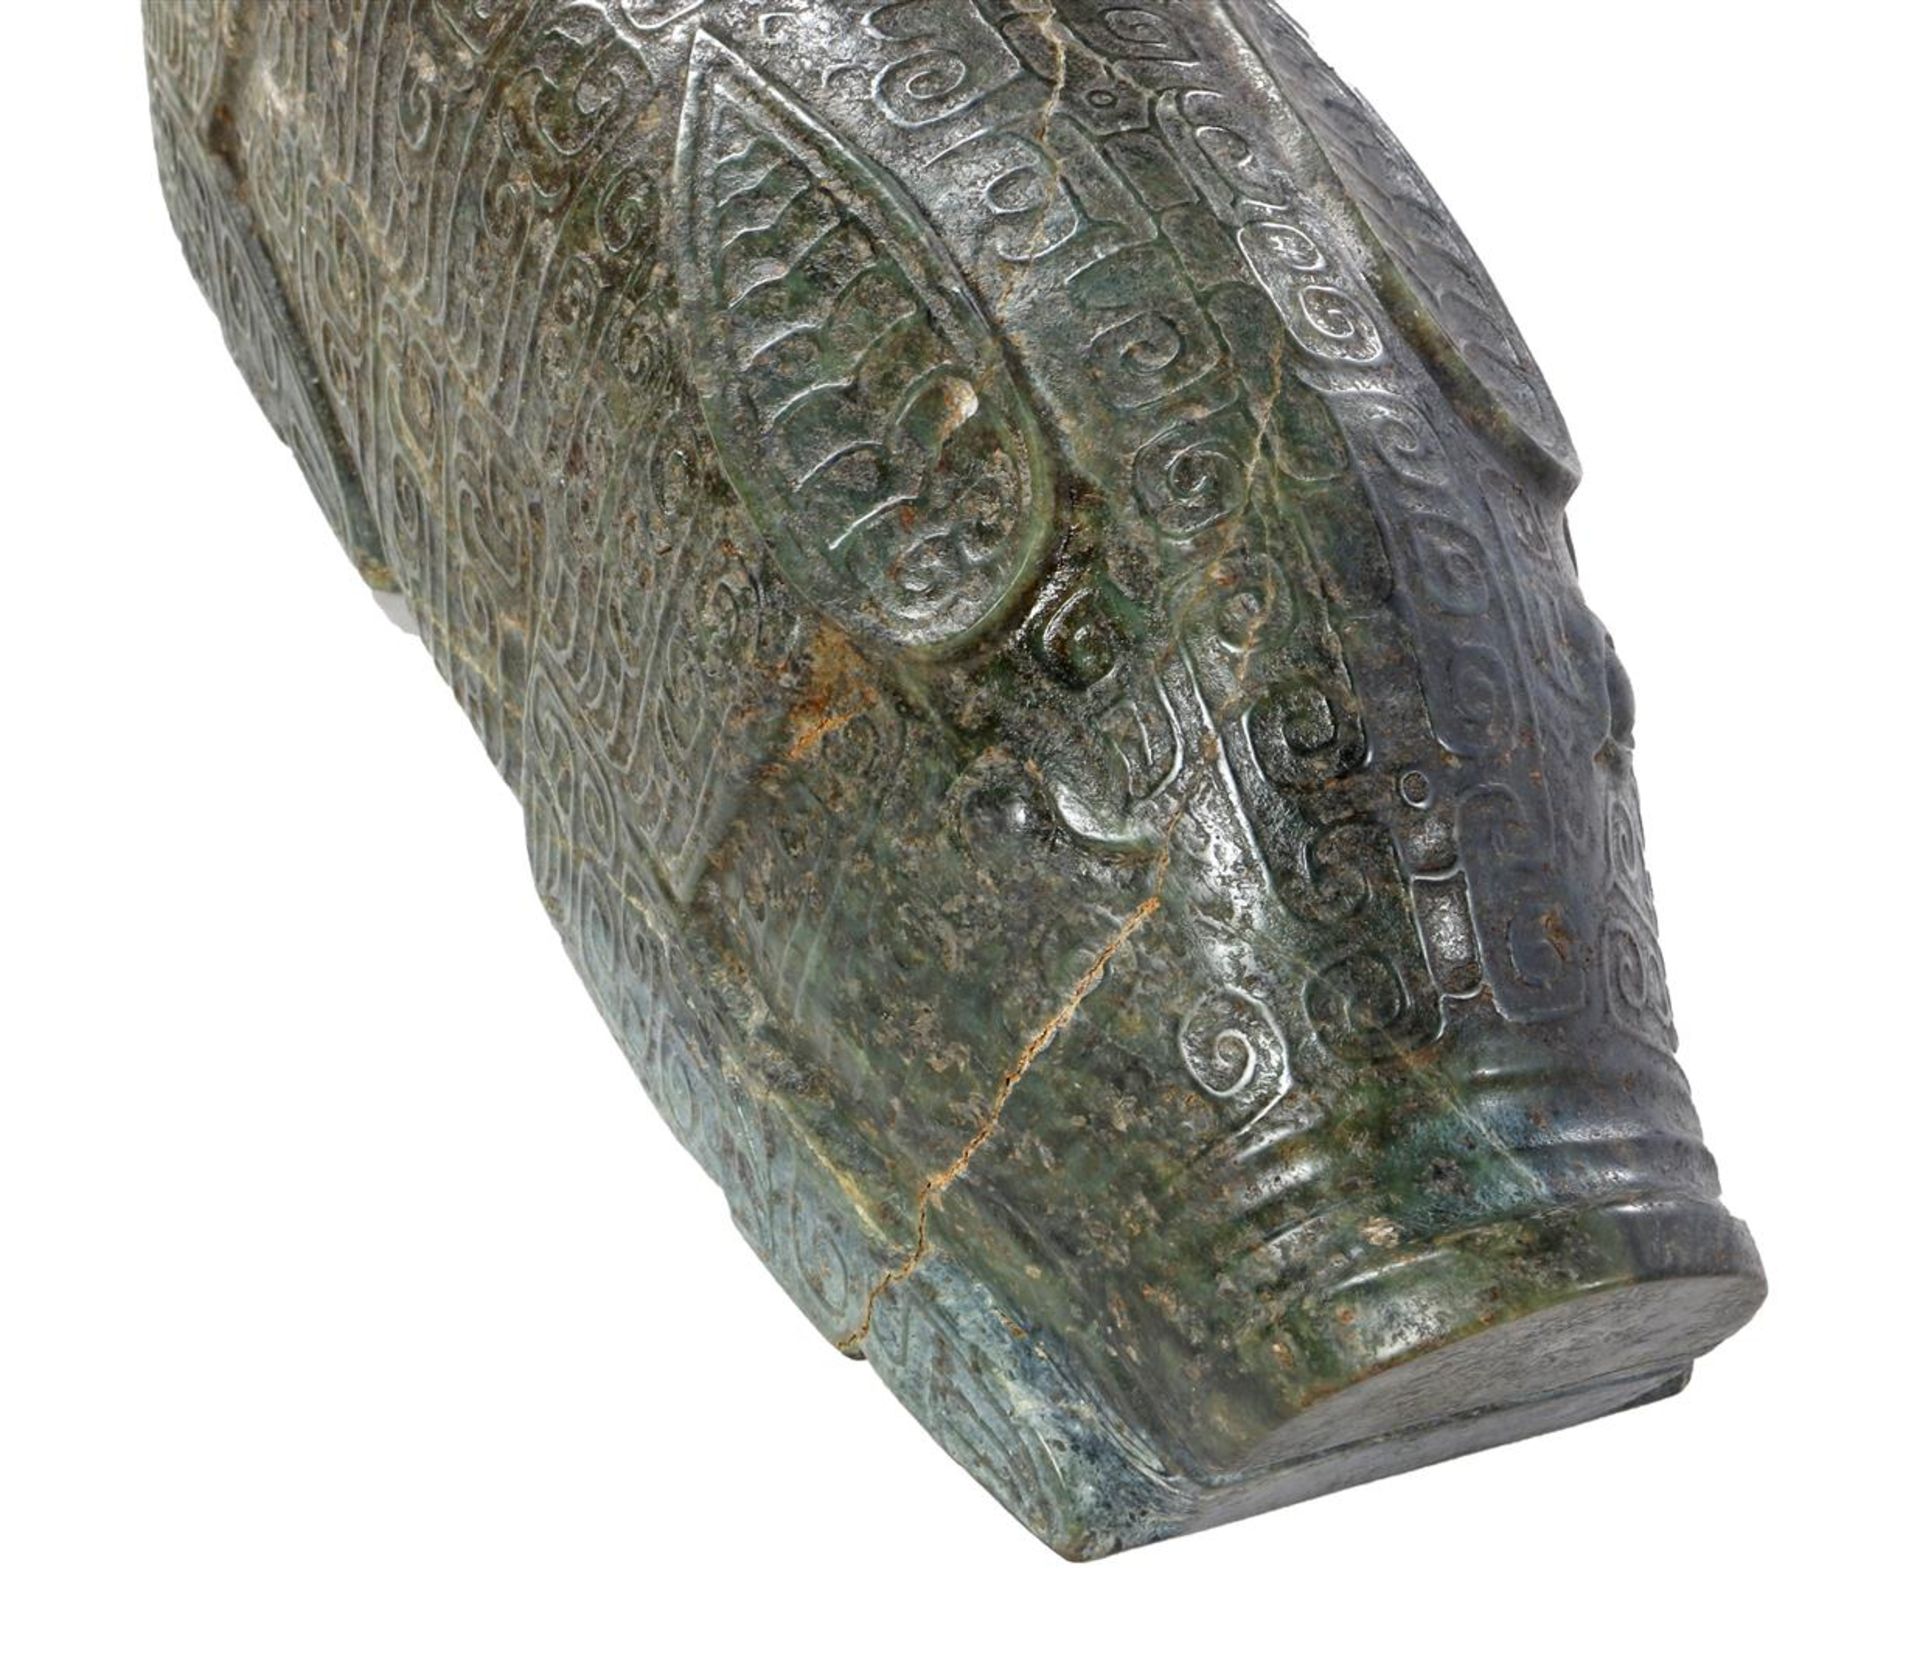 Jade carved statue of a lying pig, 65 cm long - Image 2 of 2